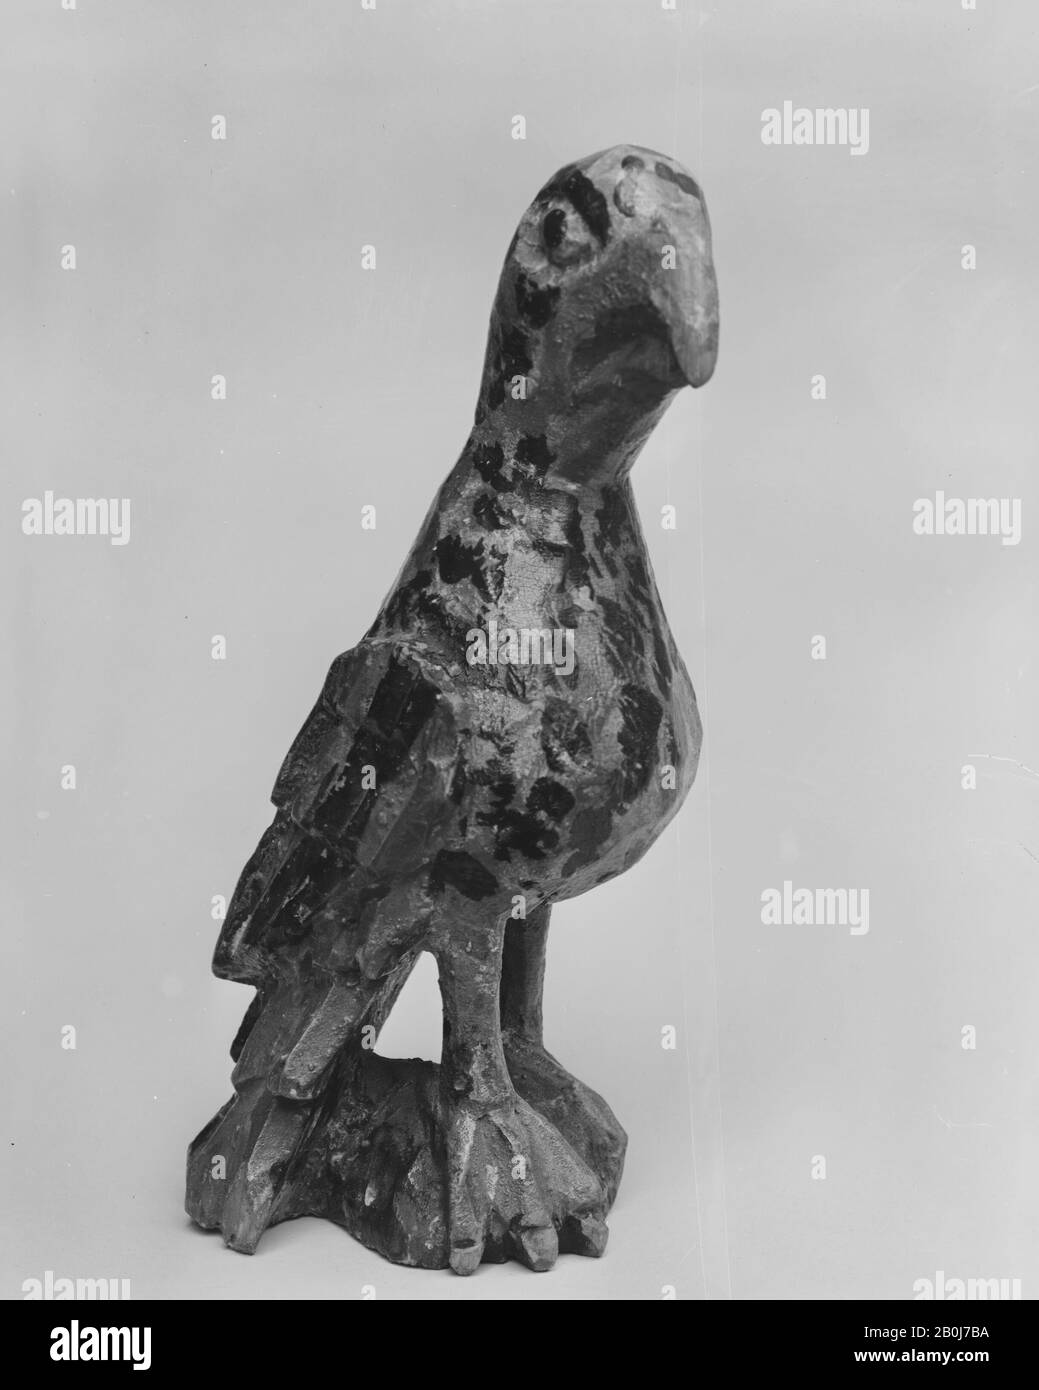 Attributed to Wilhelm Schimmel, Parrot, American, Attributed to Wilhelm Schimmel (probably 1817–1890), 1865–90, Made in Cumberland County, Pennsylvania, United States, American, White pine, 6 in. H. (15.24 cm), Sculpture Stock Photo